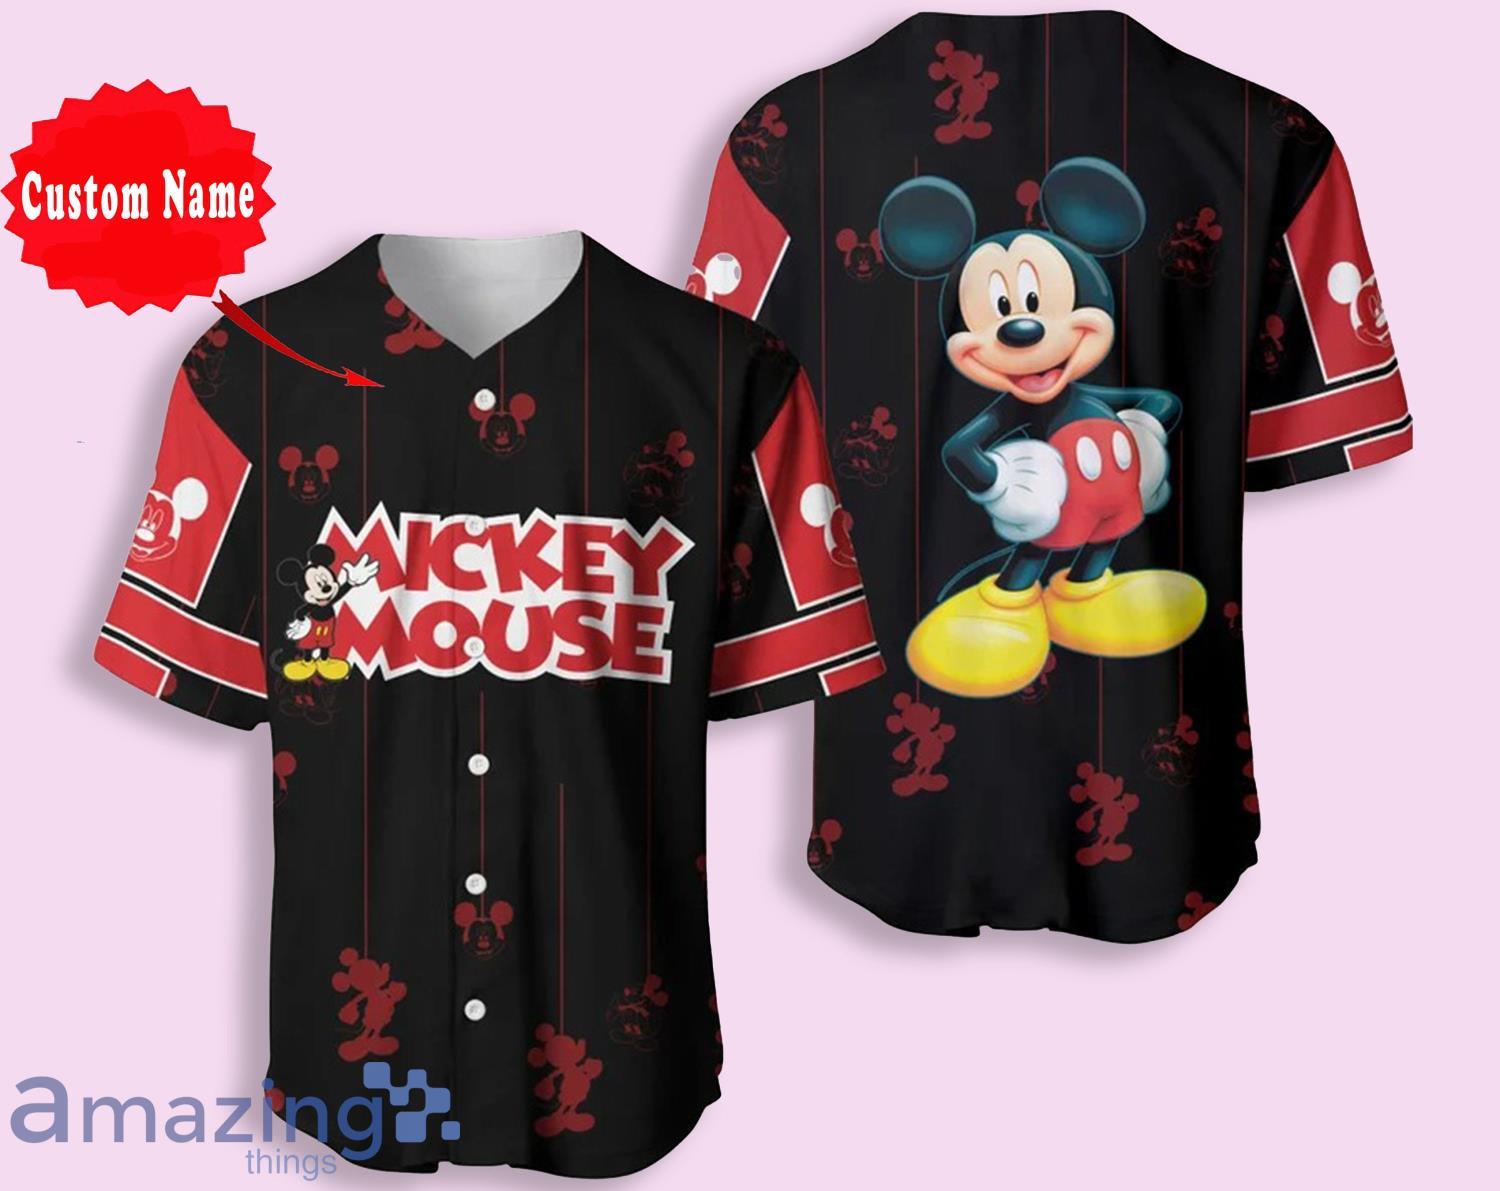 Custom Number And Name Mcqueen Red Horizontal Baseball Jersey Disney Men  And Women Gift For Fans - Freedomdesign